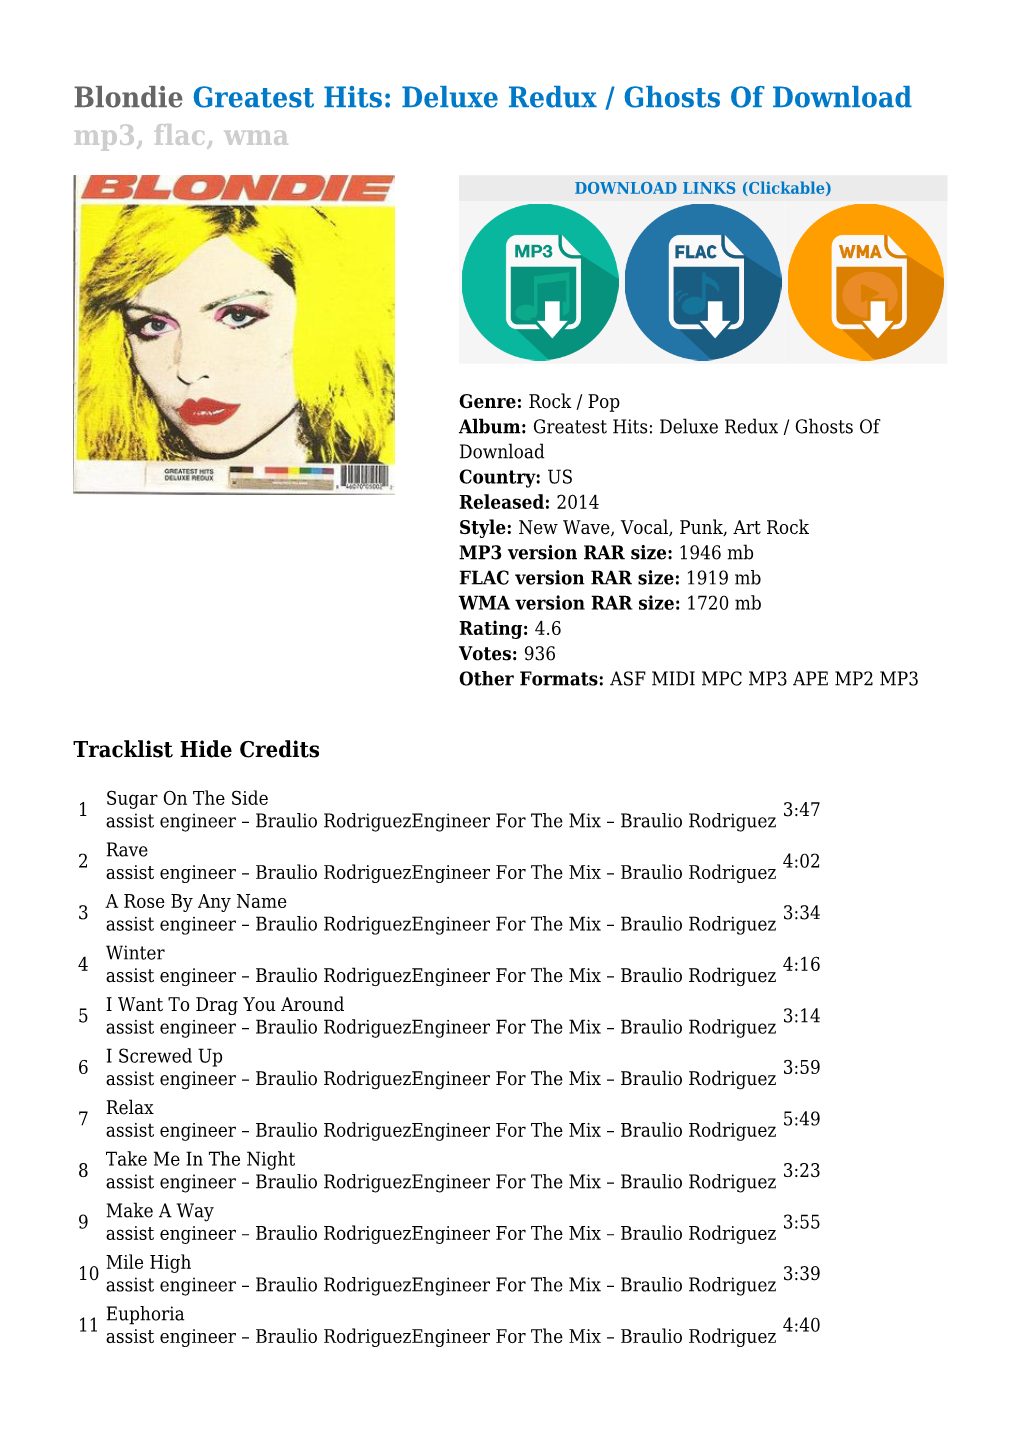 Blondie Greatest Hits: Deluxe Redux / Ghosts of Download Mp3, Flac, Wma